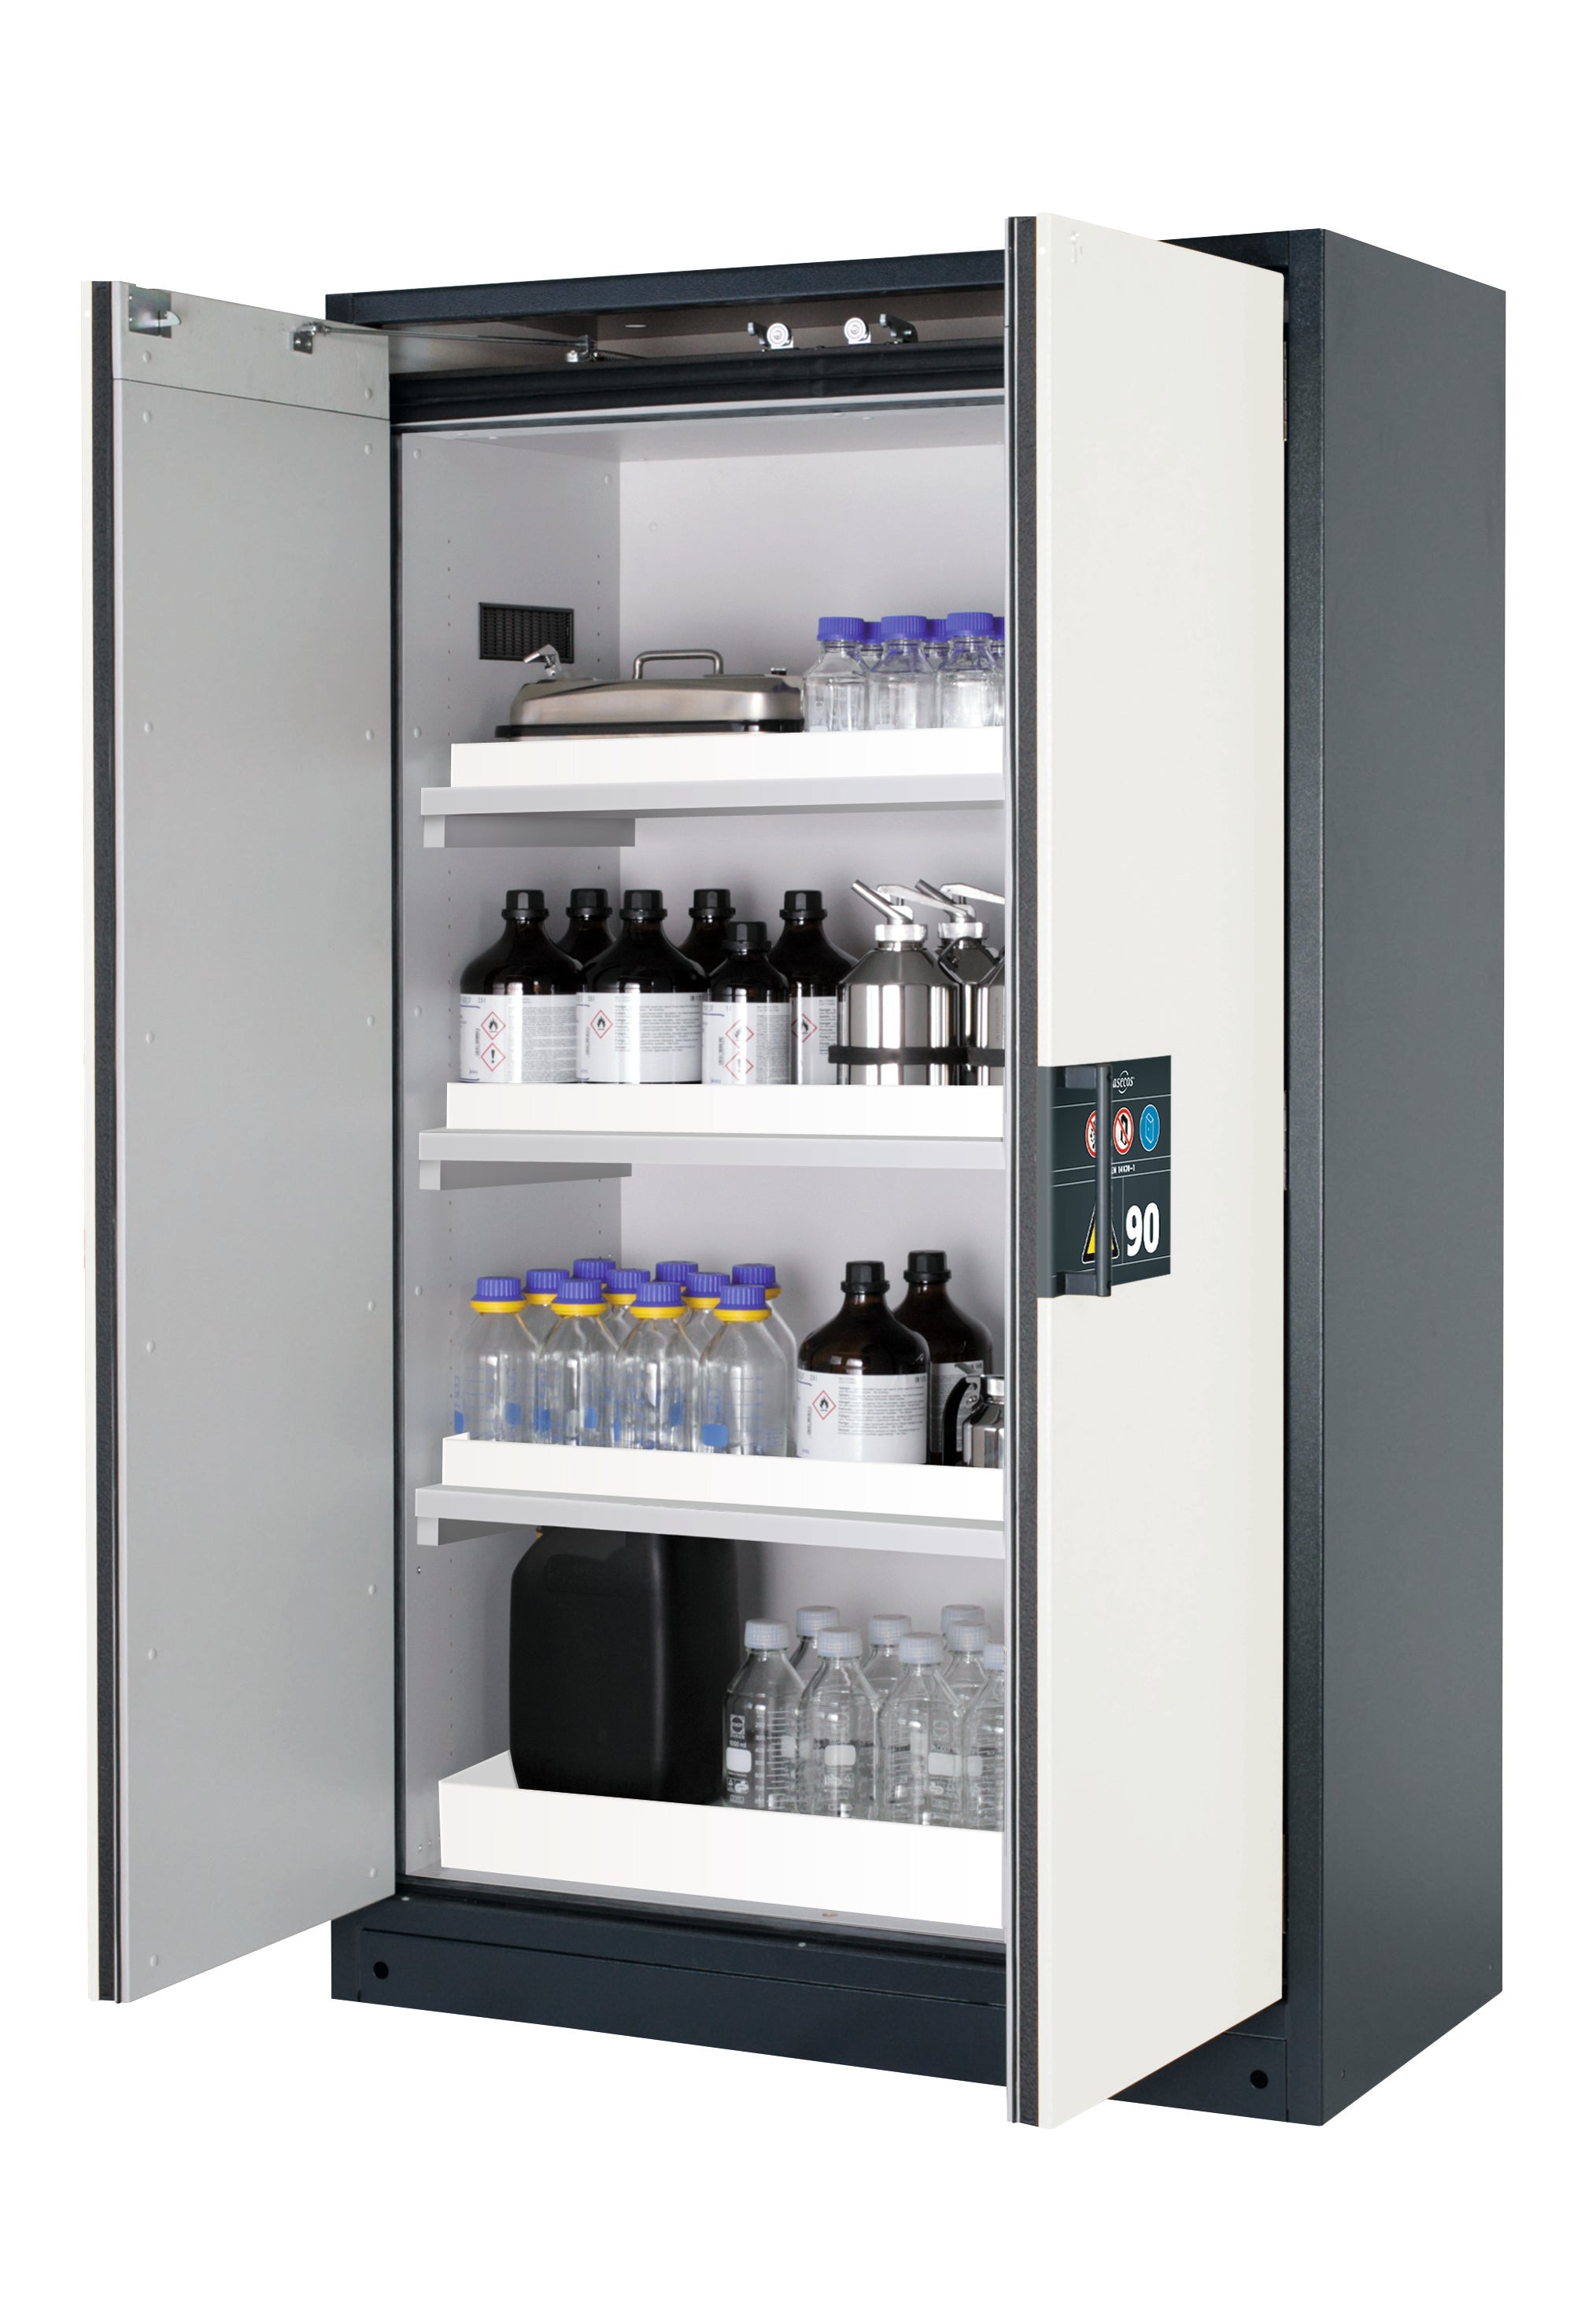 Type 90 safety storage cabinet Q-CLASSIC-90 model Q90.195.120 in pure white RAL 9010 with 3x tray shelf (standard) (polypropylene),